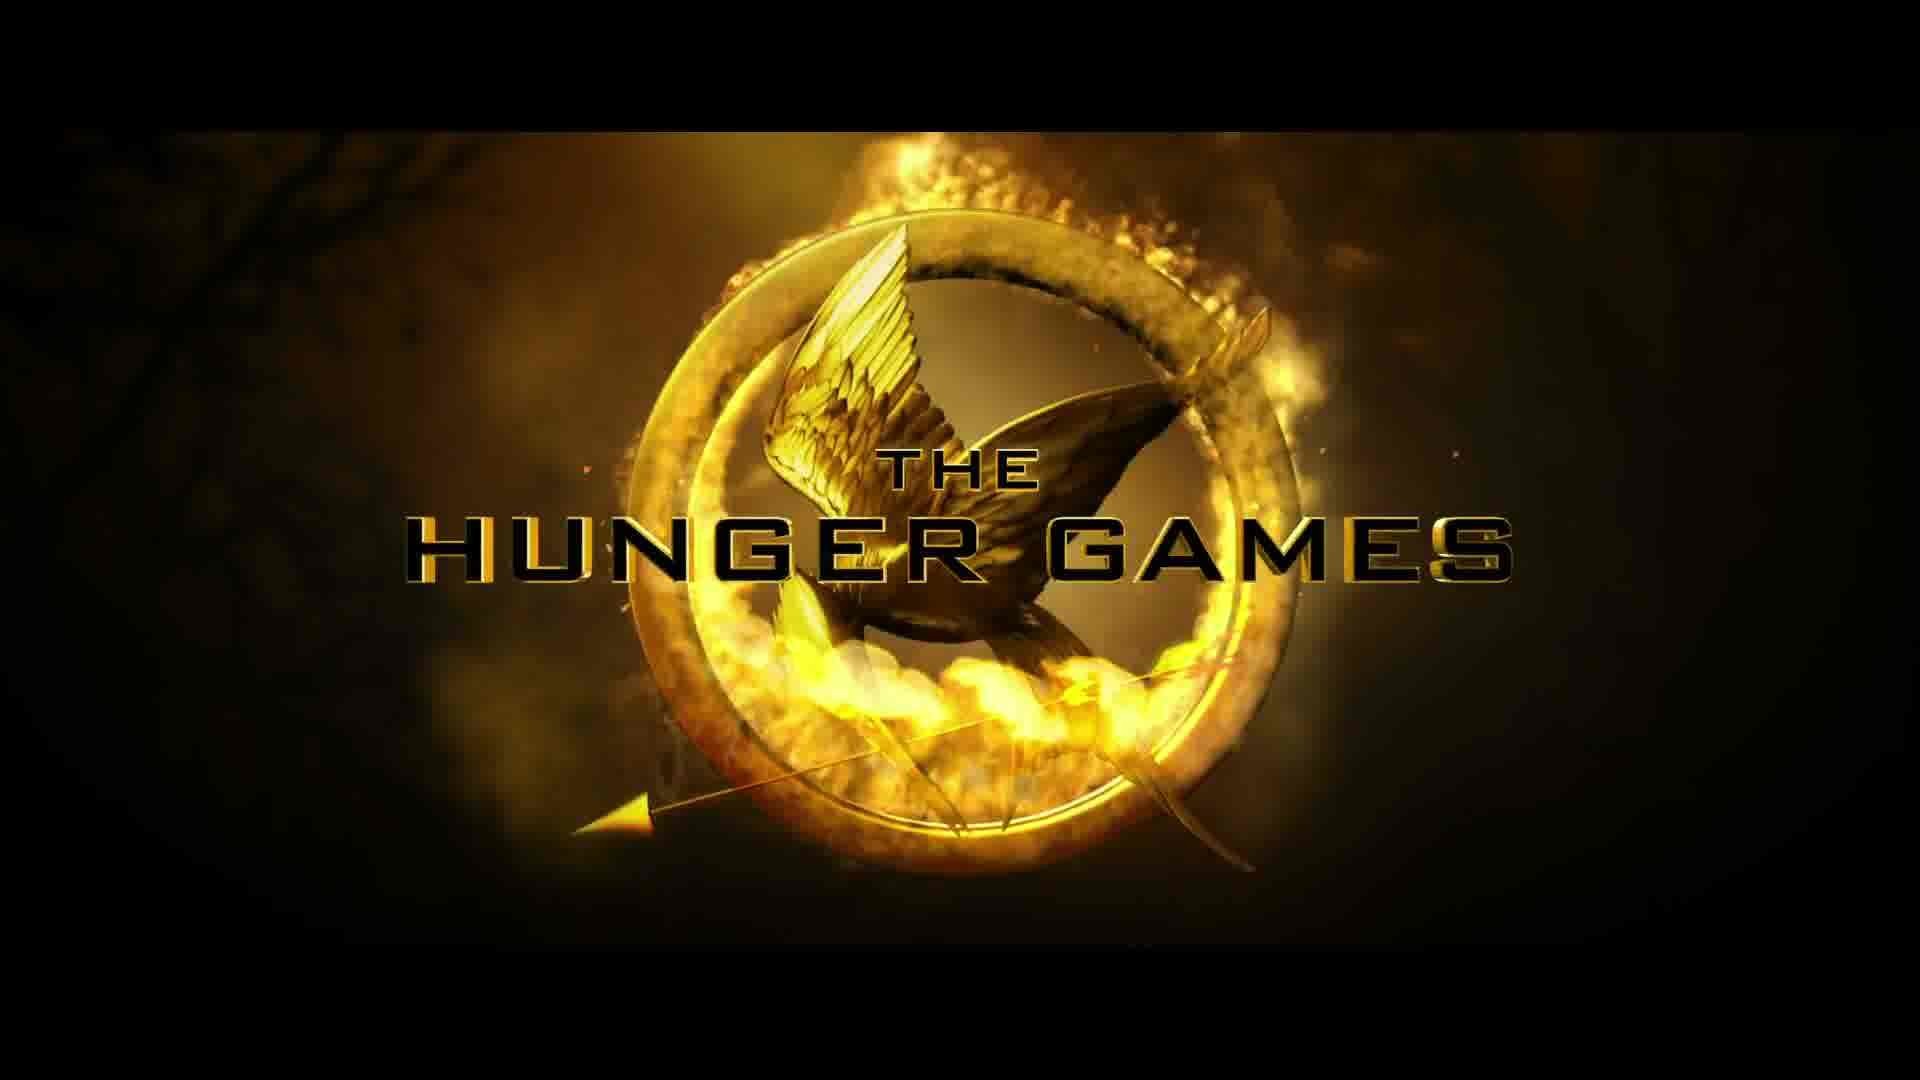 1920x1080 The Hunger Games Â« Desktop Background Wallpapers HD